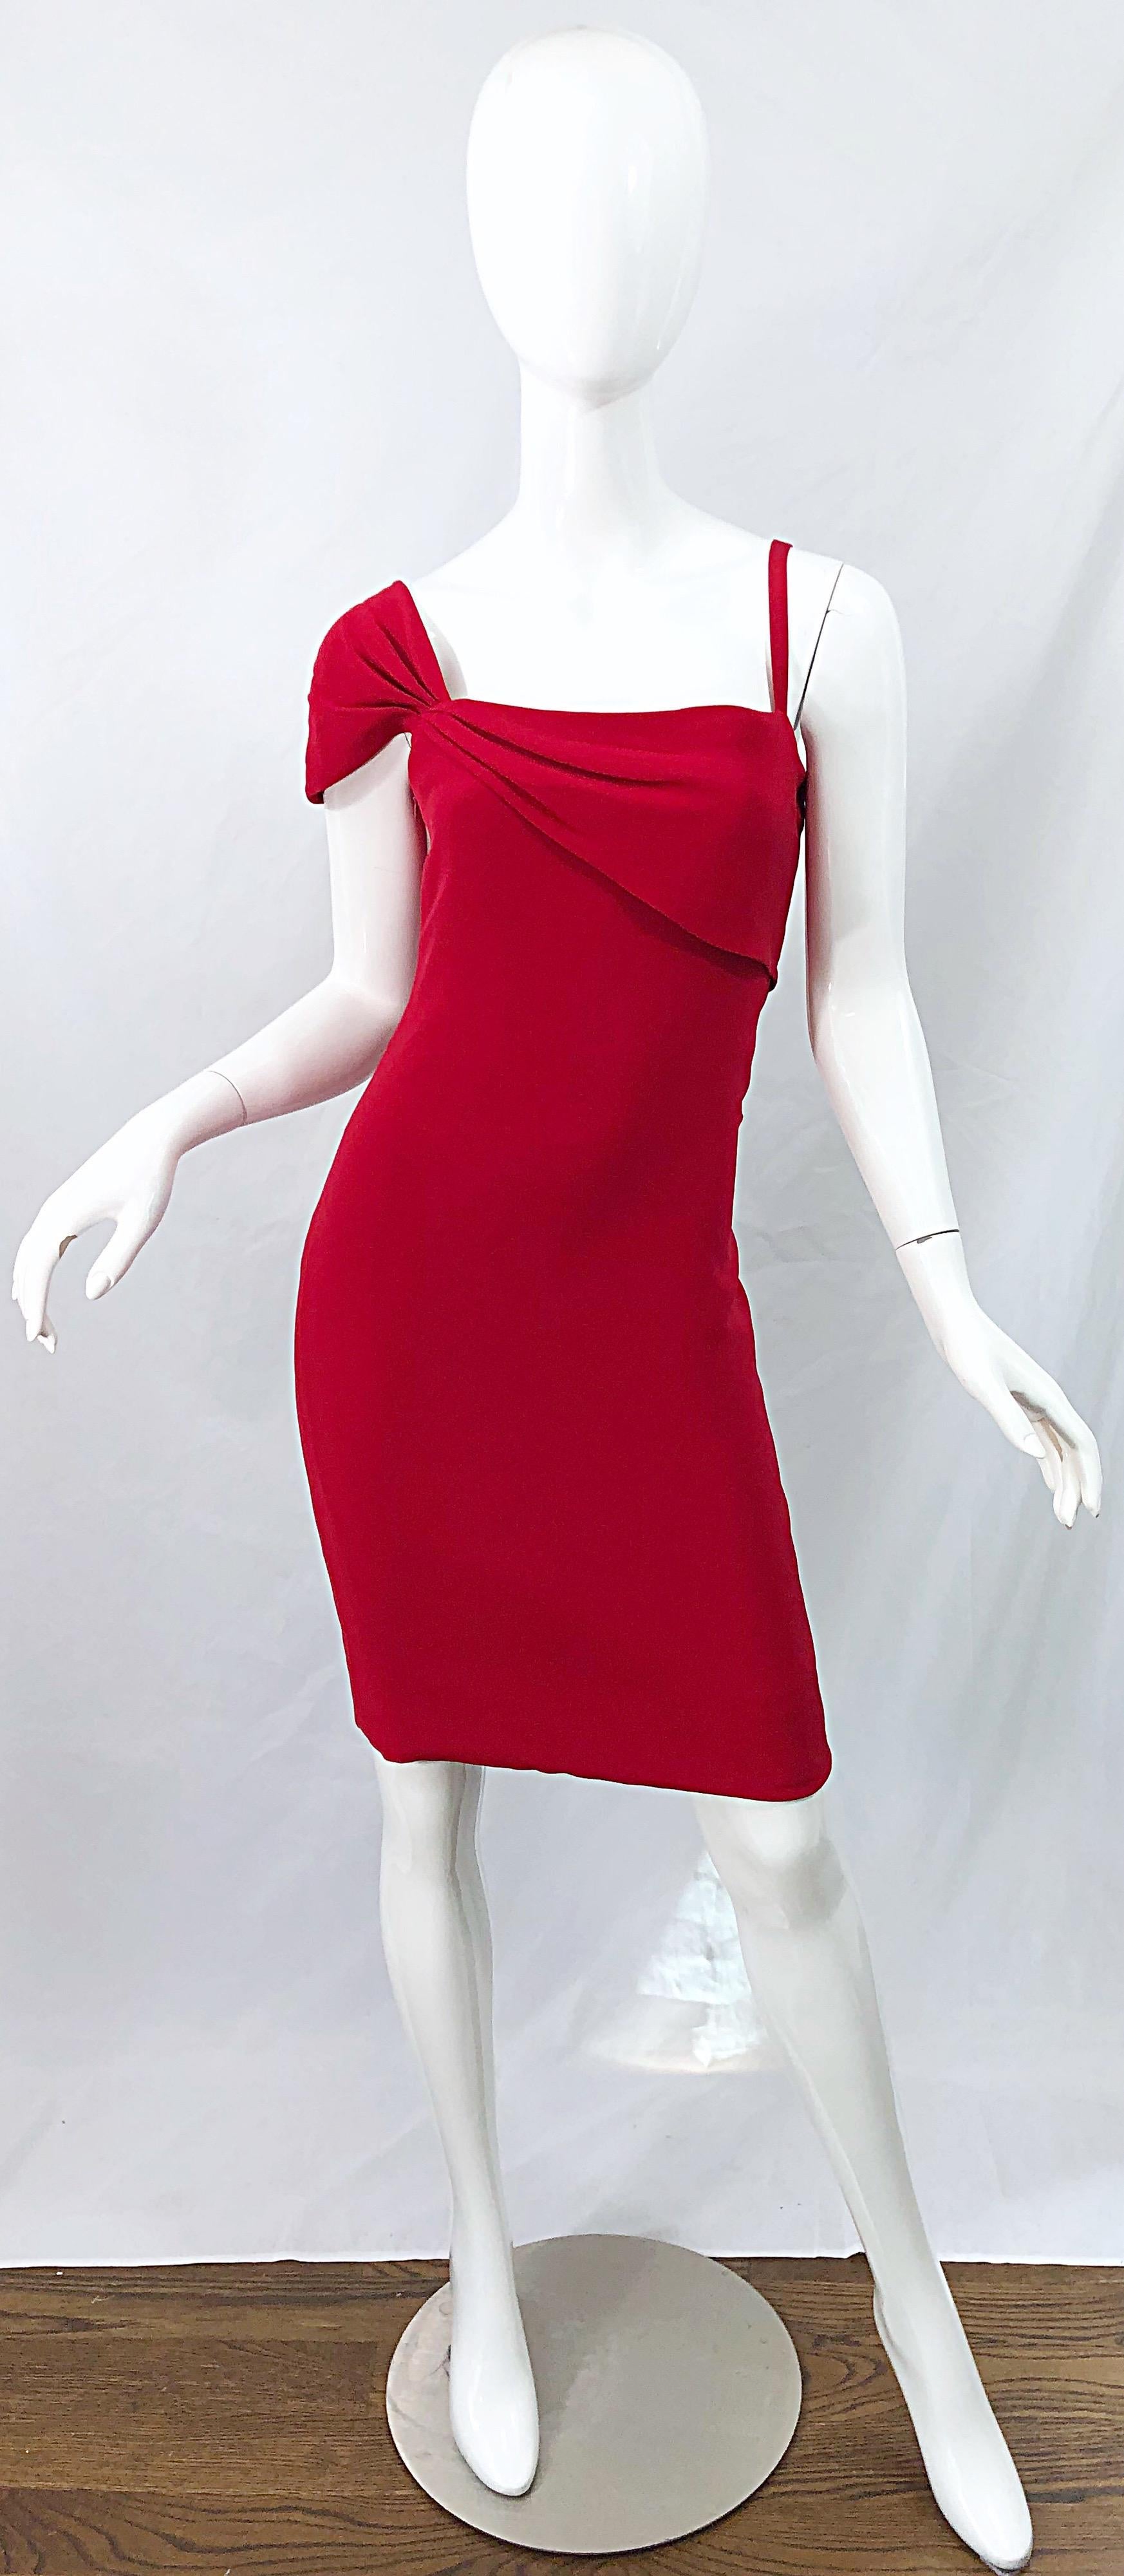 Amazing vintage 90s BILL BLASS for Saks 5th Avenue lipstick red one shoulder silk dress! Features a flattering fit with a spaghetti strap on the left shoulder and a cap sleeve on the right shoulder. Drapes along the front and back bodice. Hidden